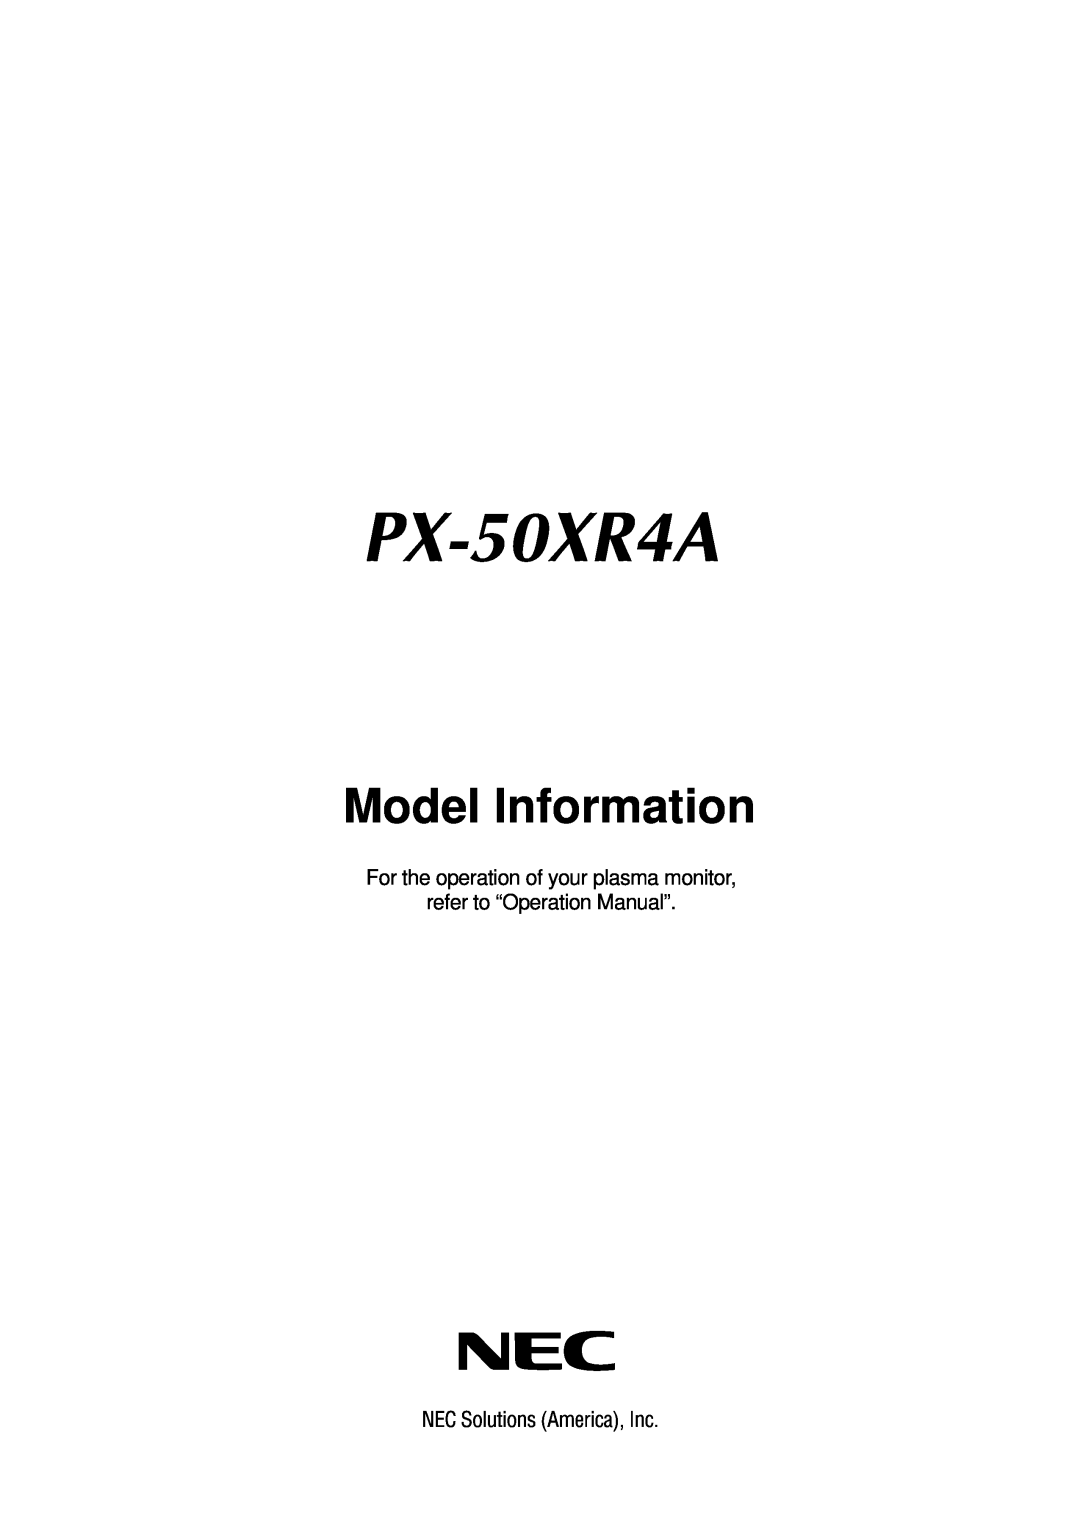 NEC PX-50XR4A operation manual Model Information, For the operation of your plasma monitor, refer to “Operation Manual” 